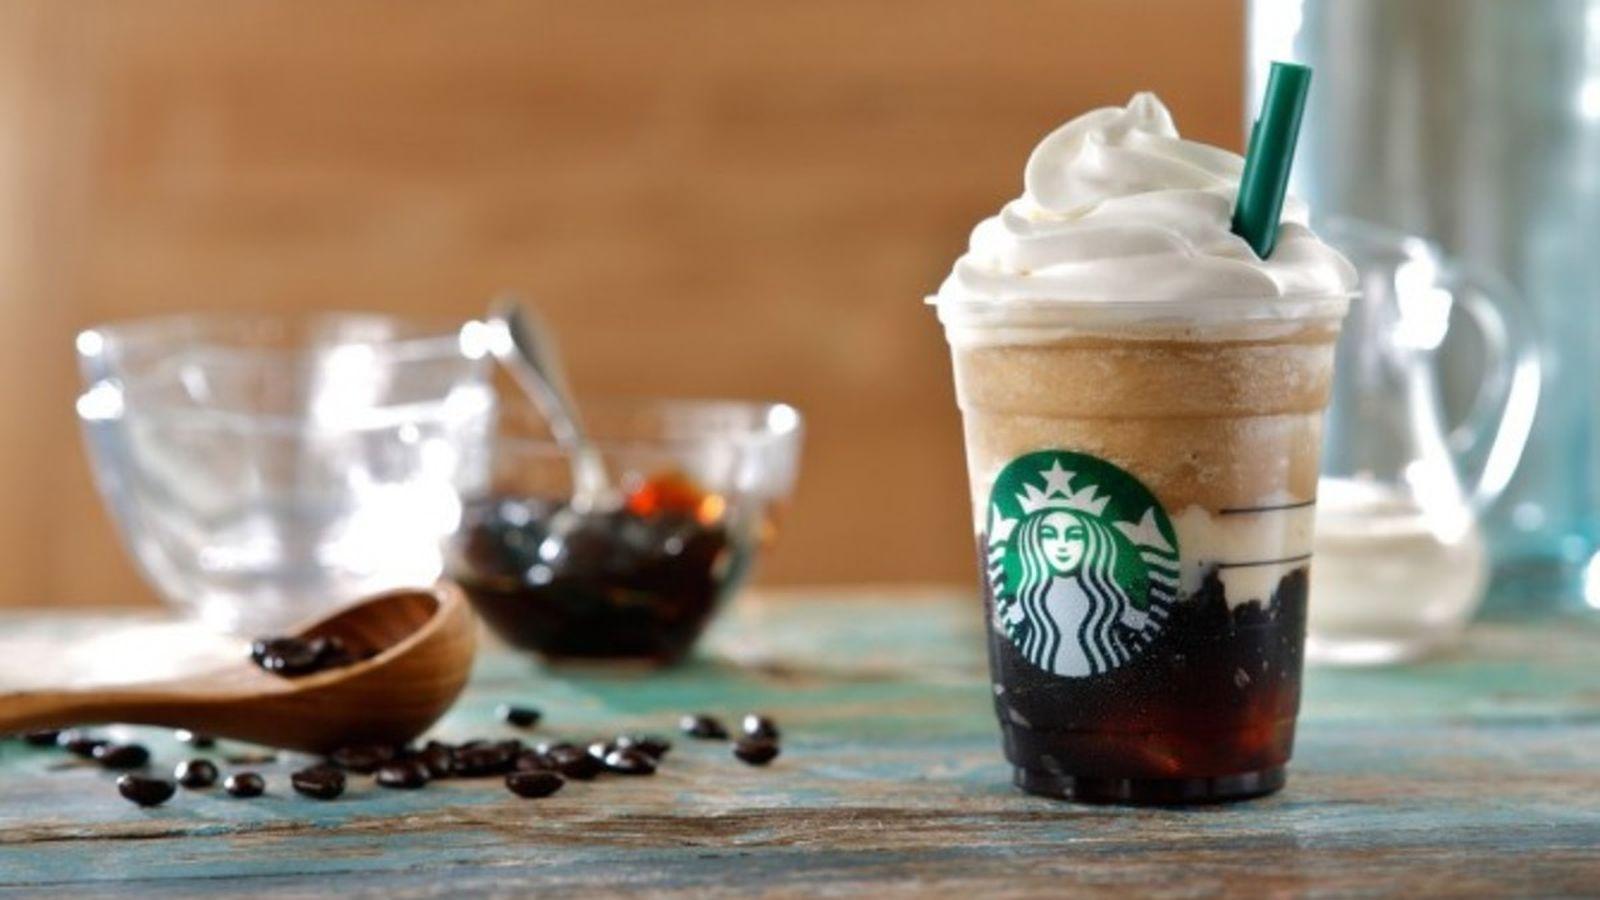 People Are Going Crazy for Starbucks Japan's Coffee Jelly